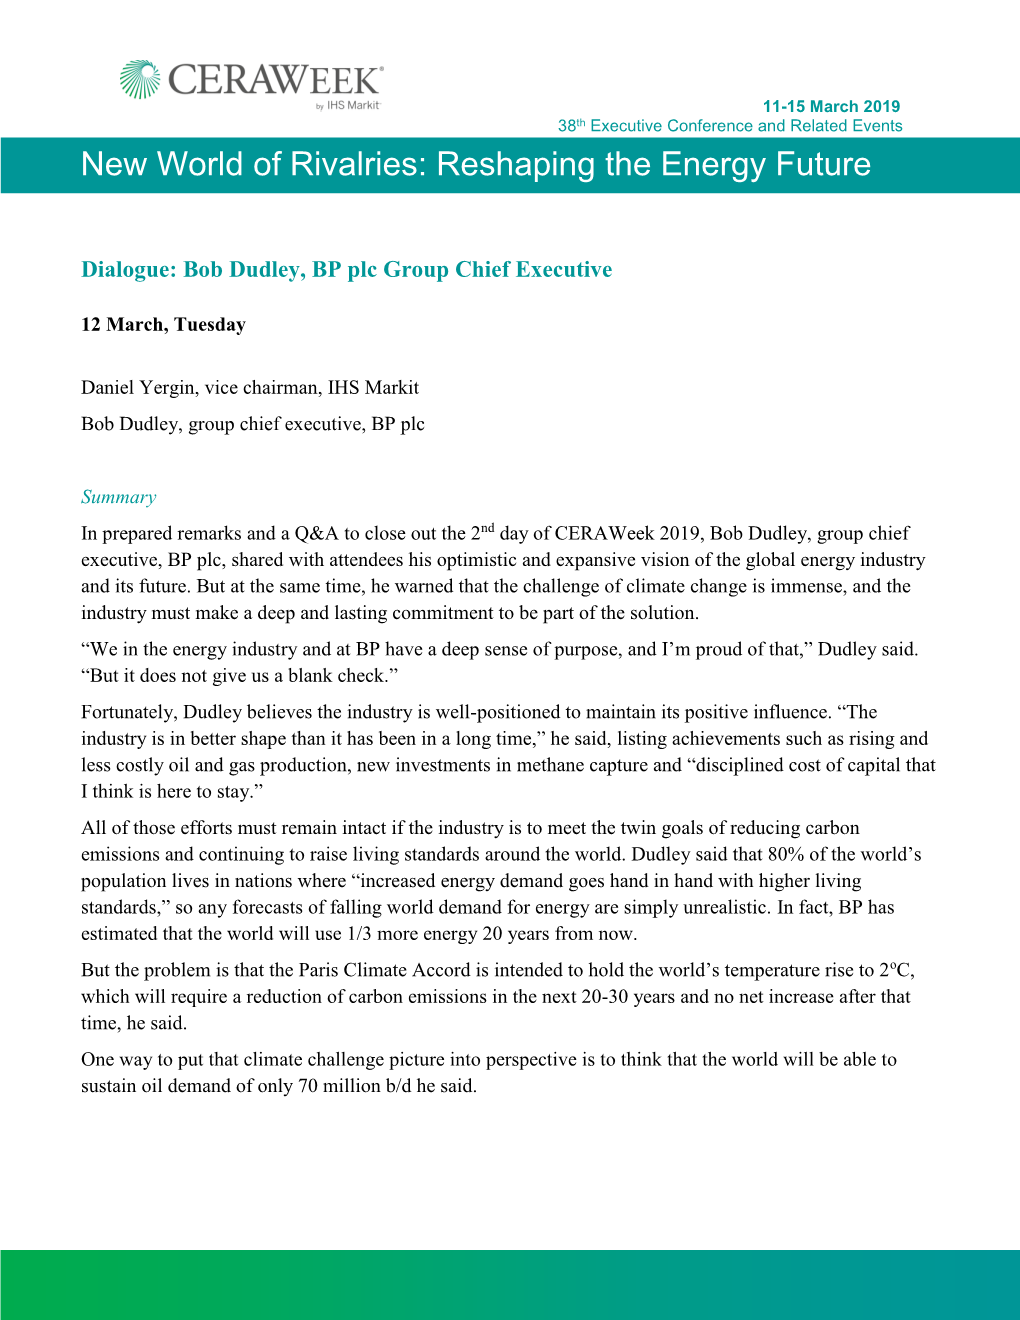 New World of Rivalries: Reshaping the Energy Future